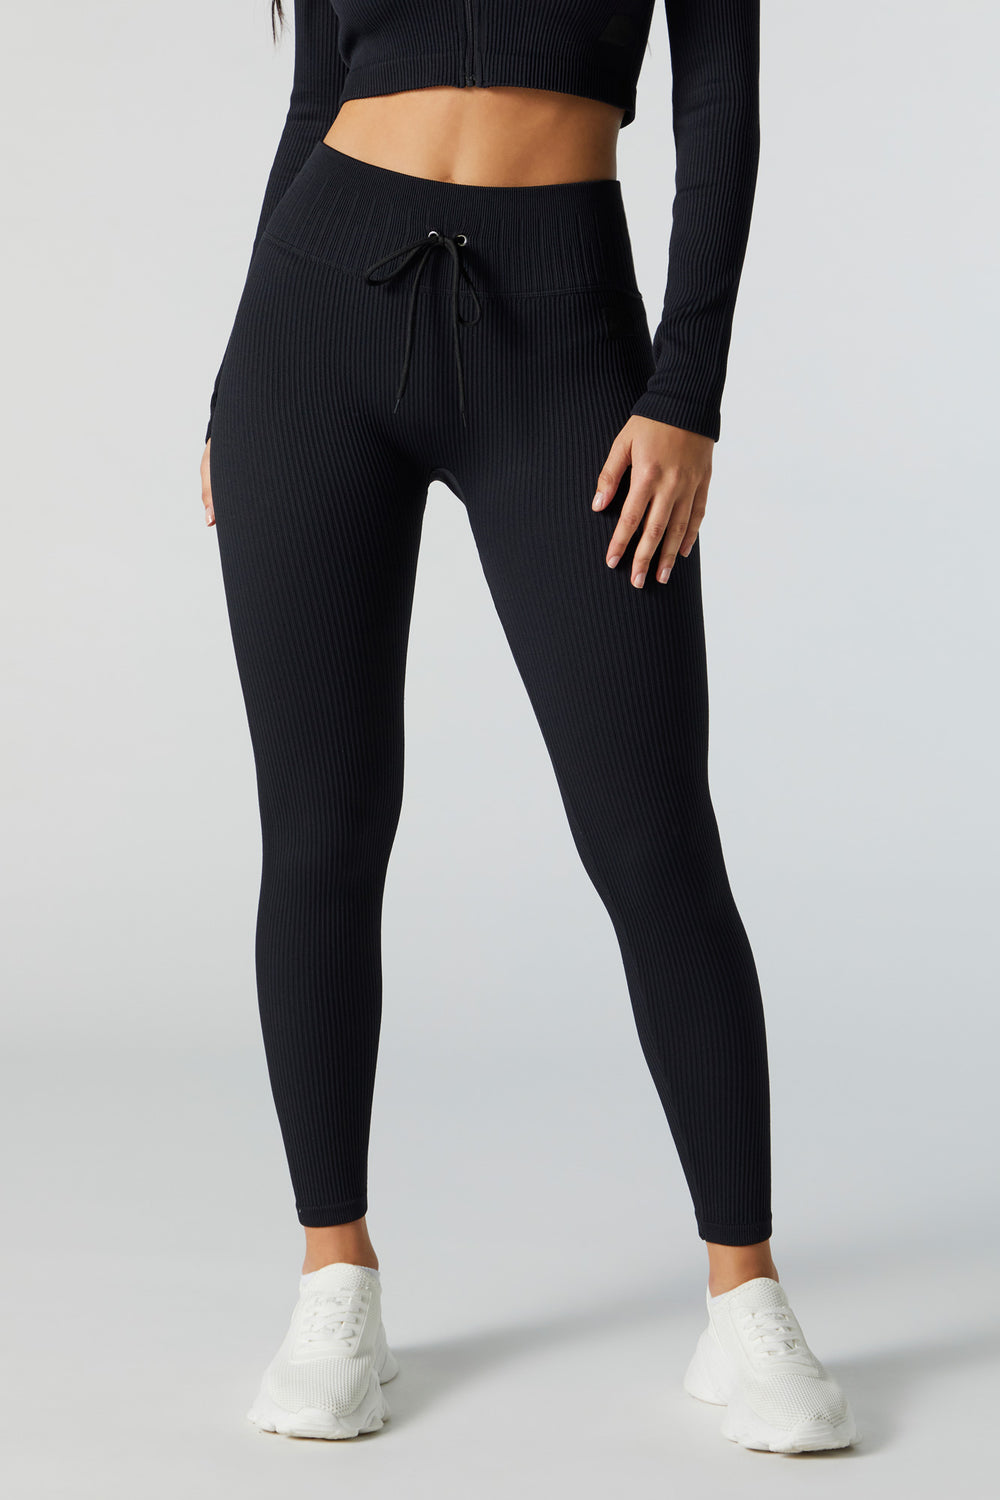 Sommer Ray Active Seamless Ribbed Legging Sommer Ray Active Seamless Ribbed Legging 6